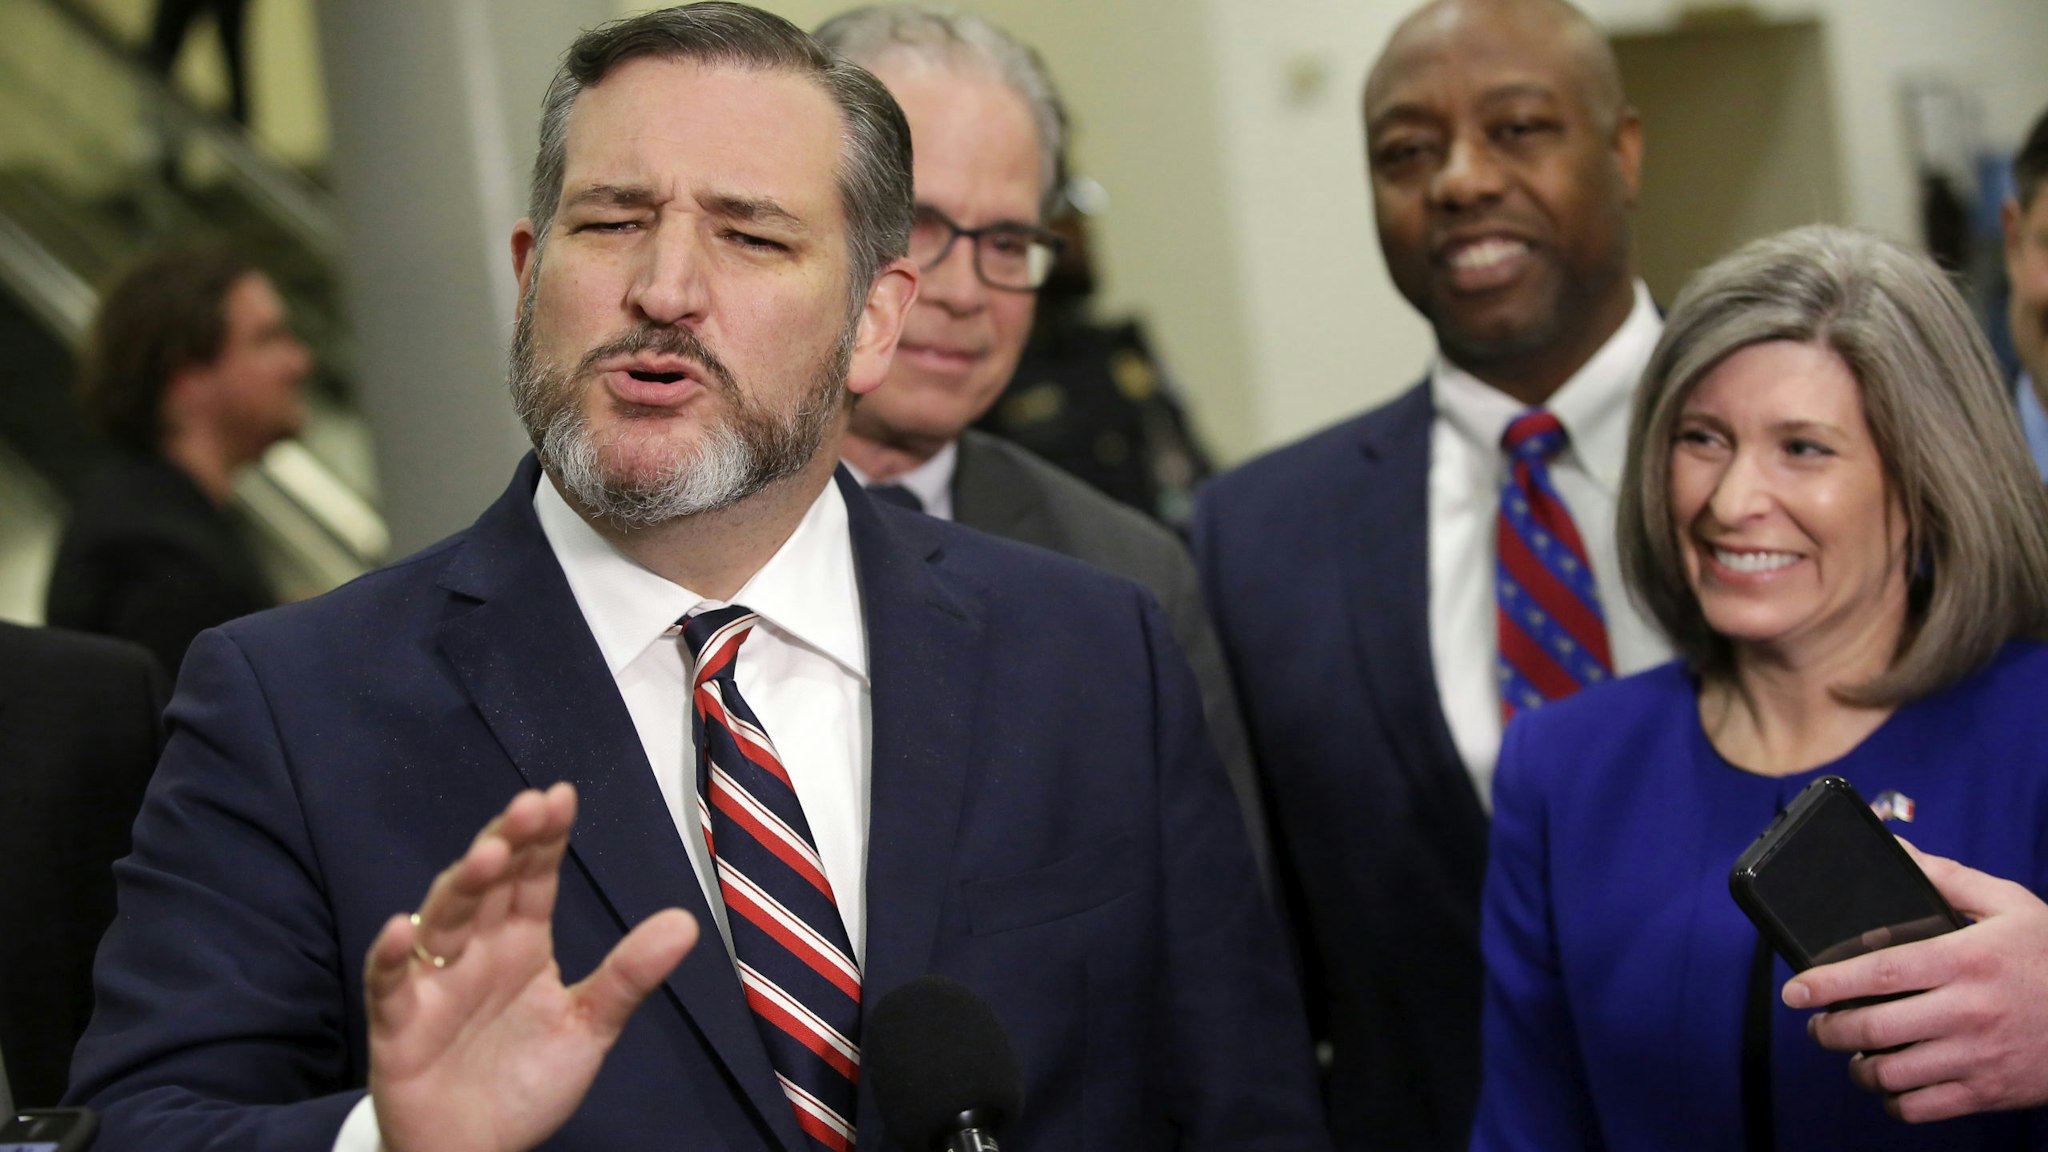 Senator Ted Cruz, a Republican from Texas, speaks during a news conference in the Senate Subway at the U.S. Capitol in Washington, D.C., U.S., on Monday, Jan. 27, 2020. President Donald Trump's team of lawyers launched into the heart of their defense Monday afternoon with their case having been rocked by bombshell revelations by National Security Advisor John Bolton reportedly contained in his book manuscript.